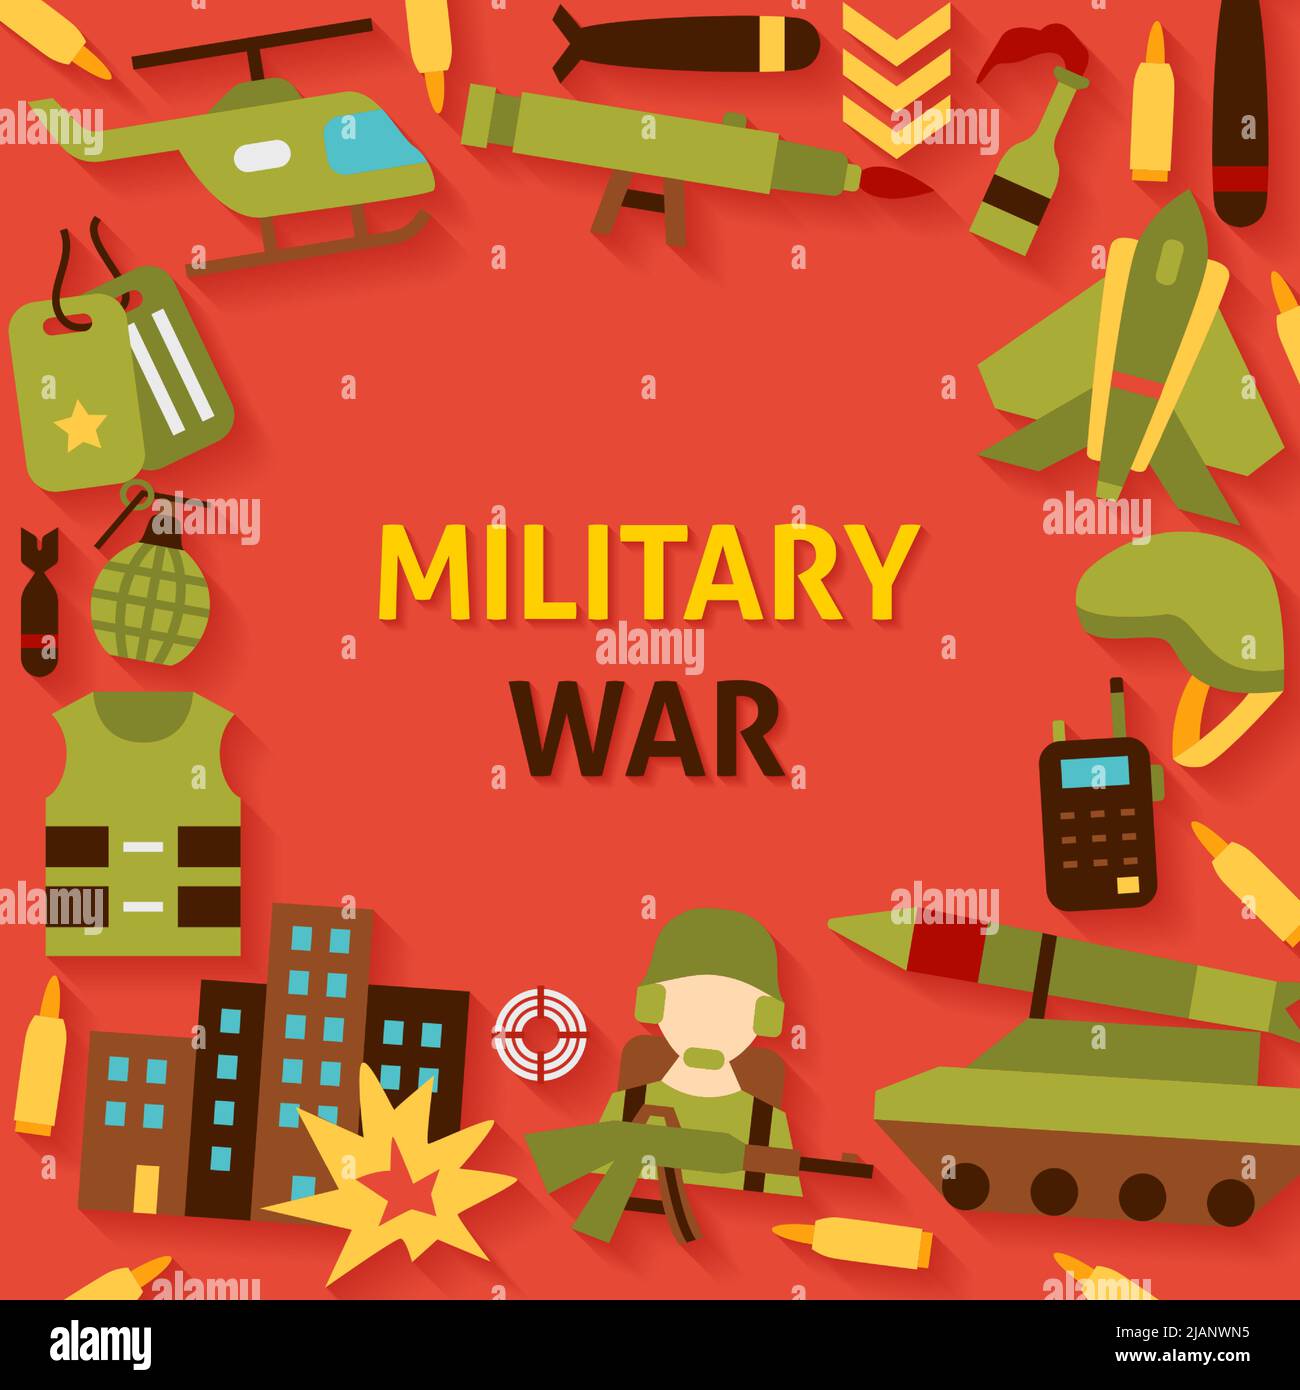 Military War Template Poster Stock Vector